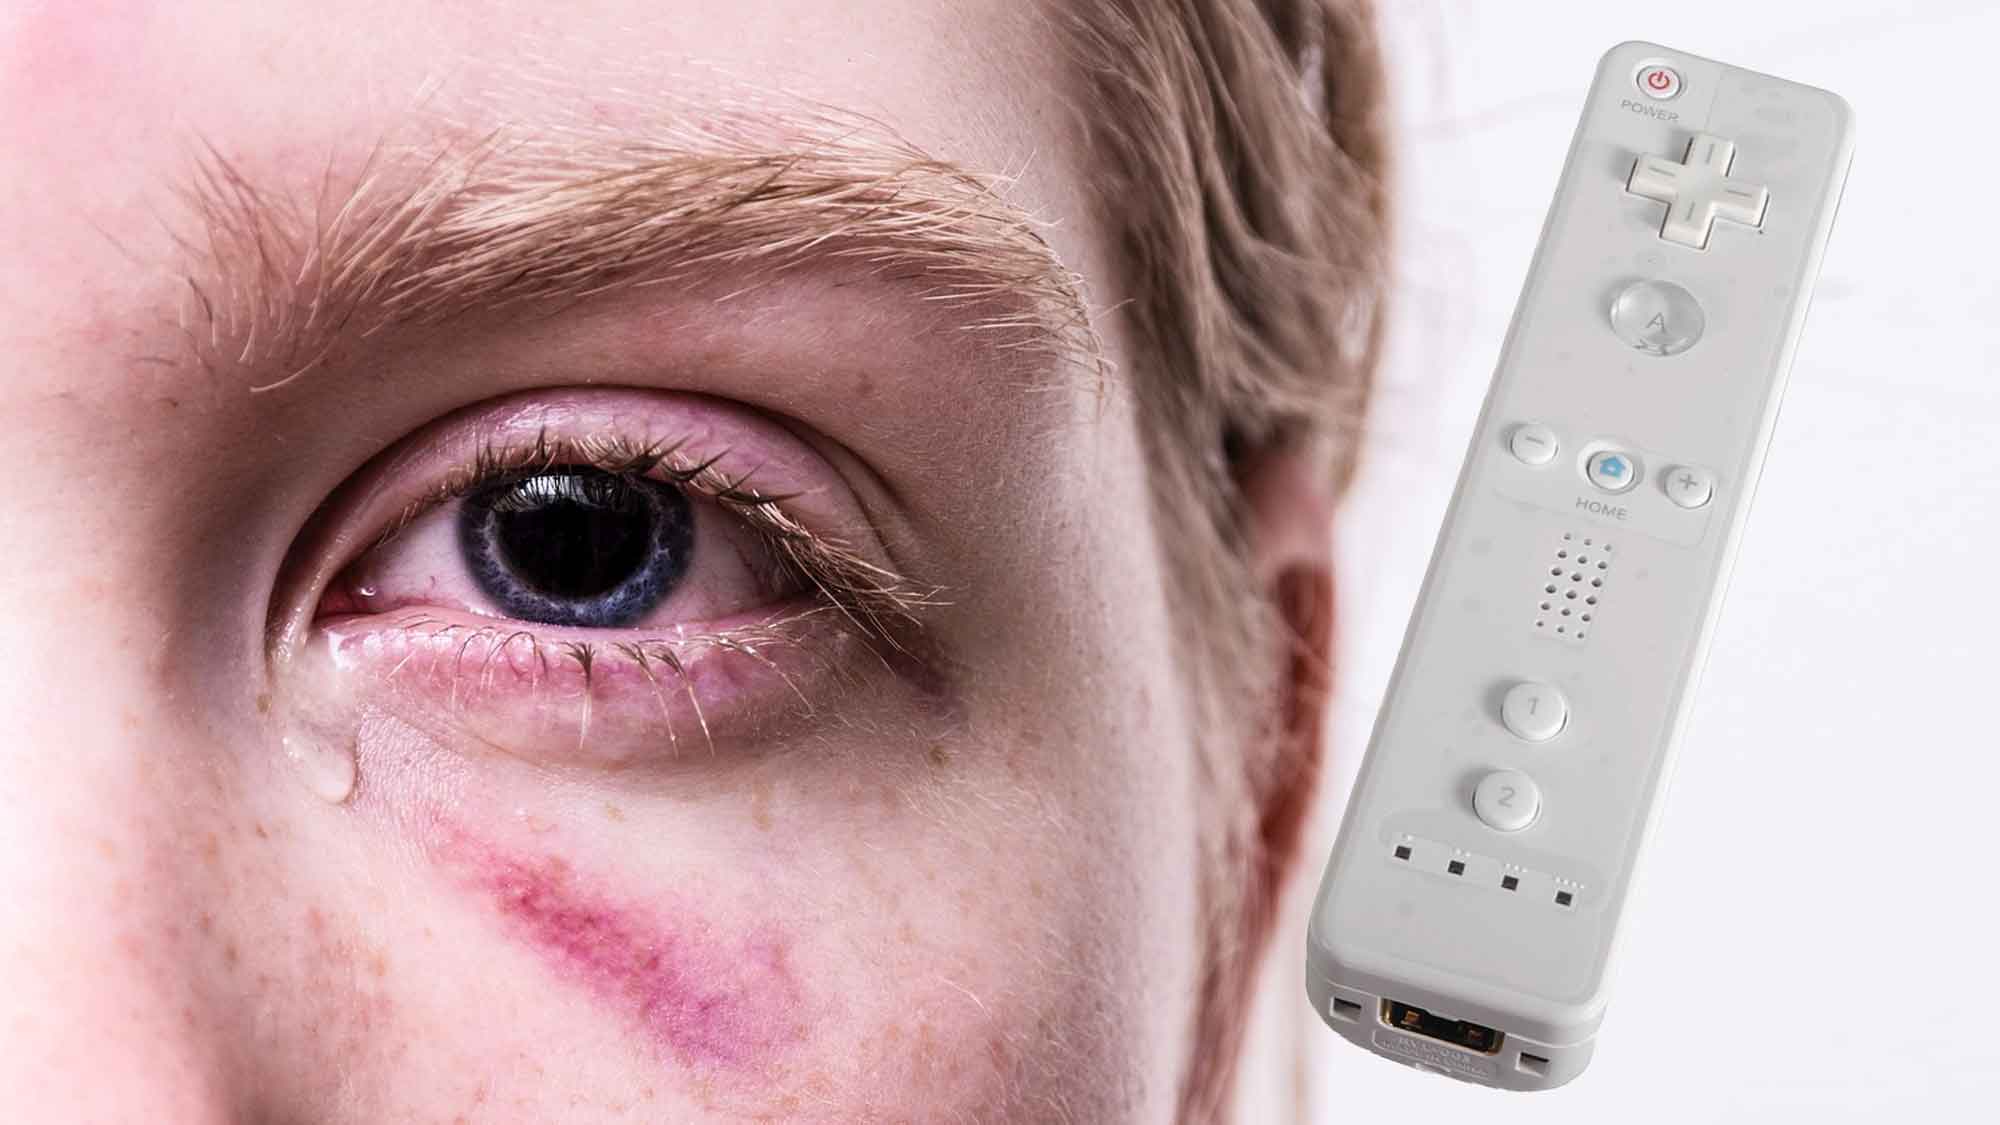 A Pain In The Wii - Reports Of Nintendo Wii Injuries On The Rise (2006)